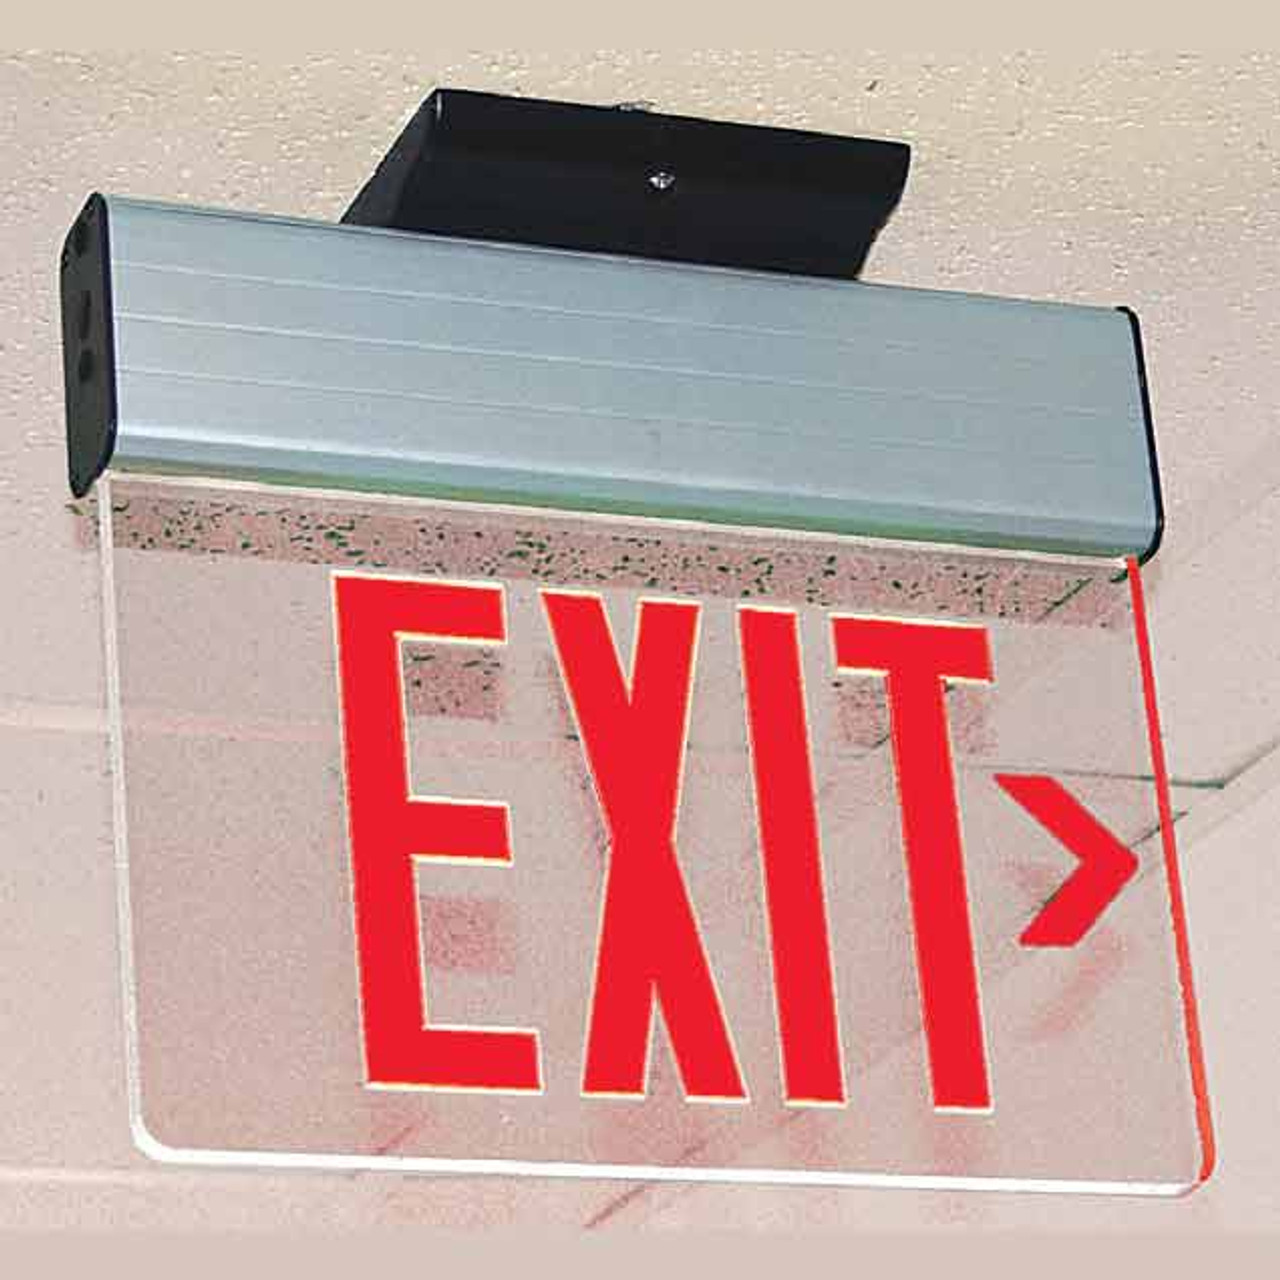 LED Edge-Lit Red Exit Sign with Battery Back-up